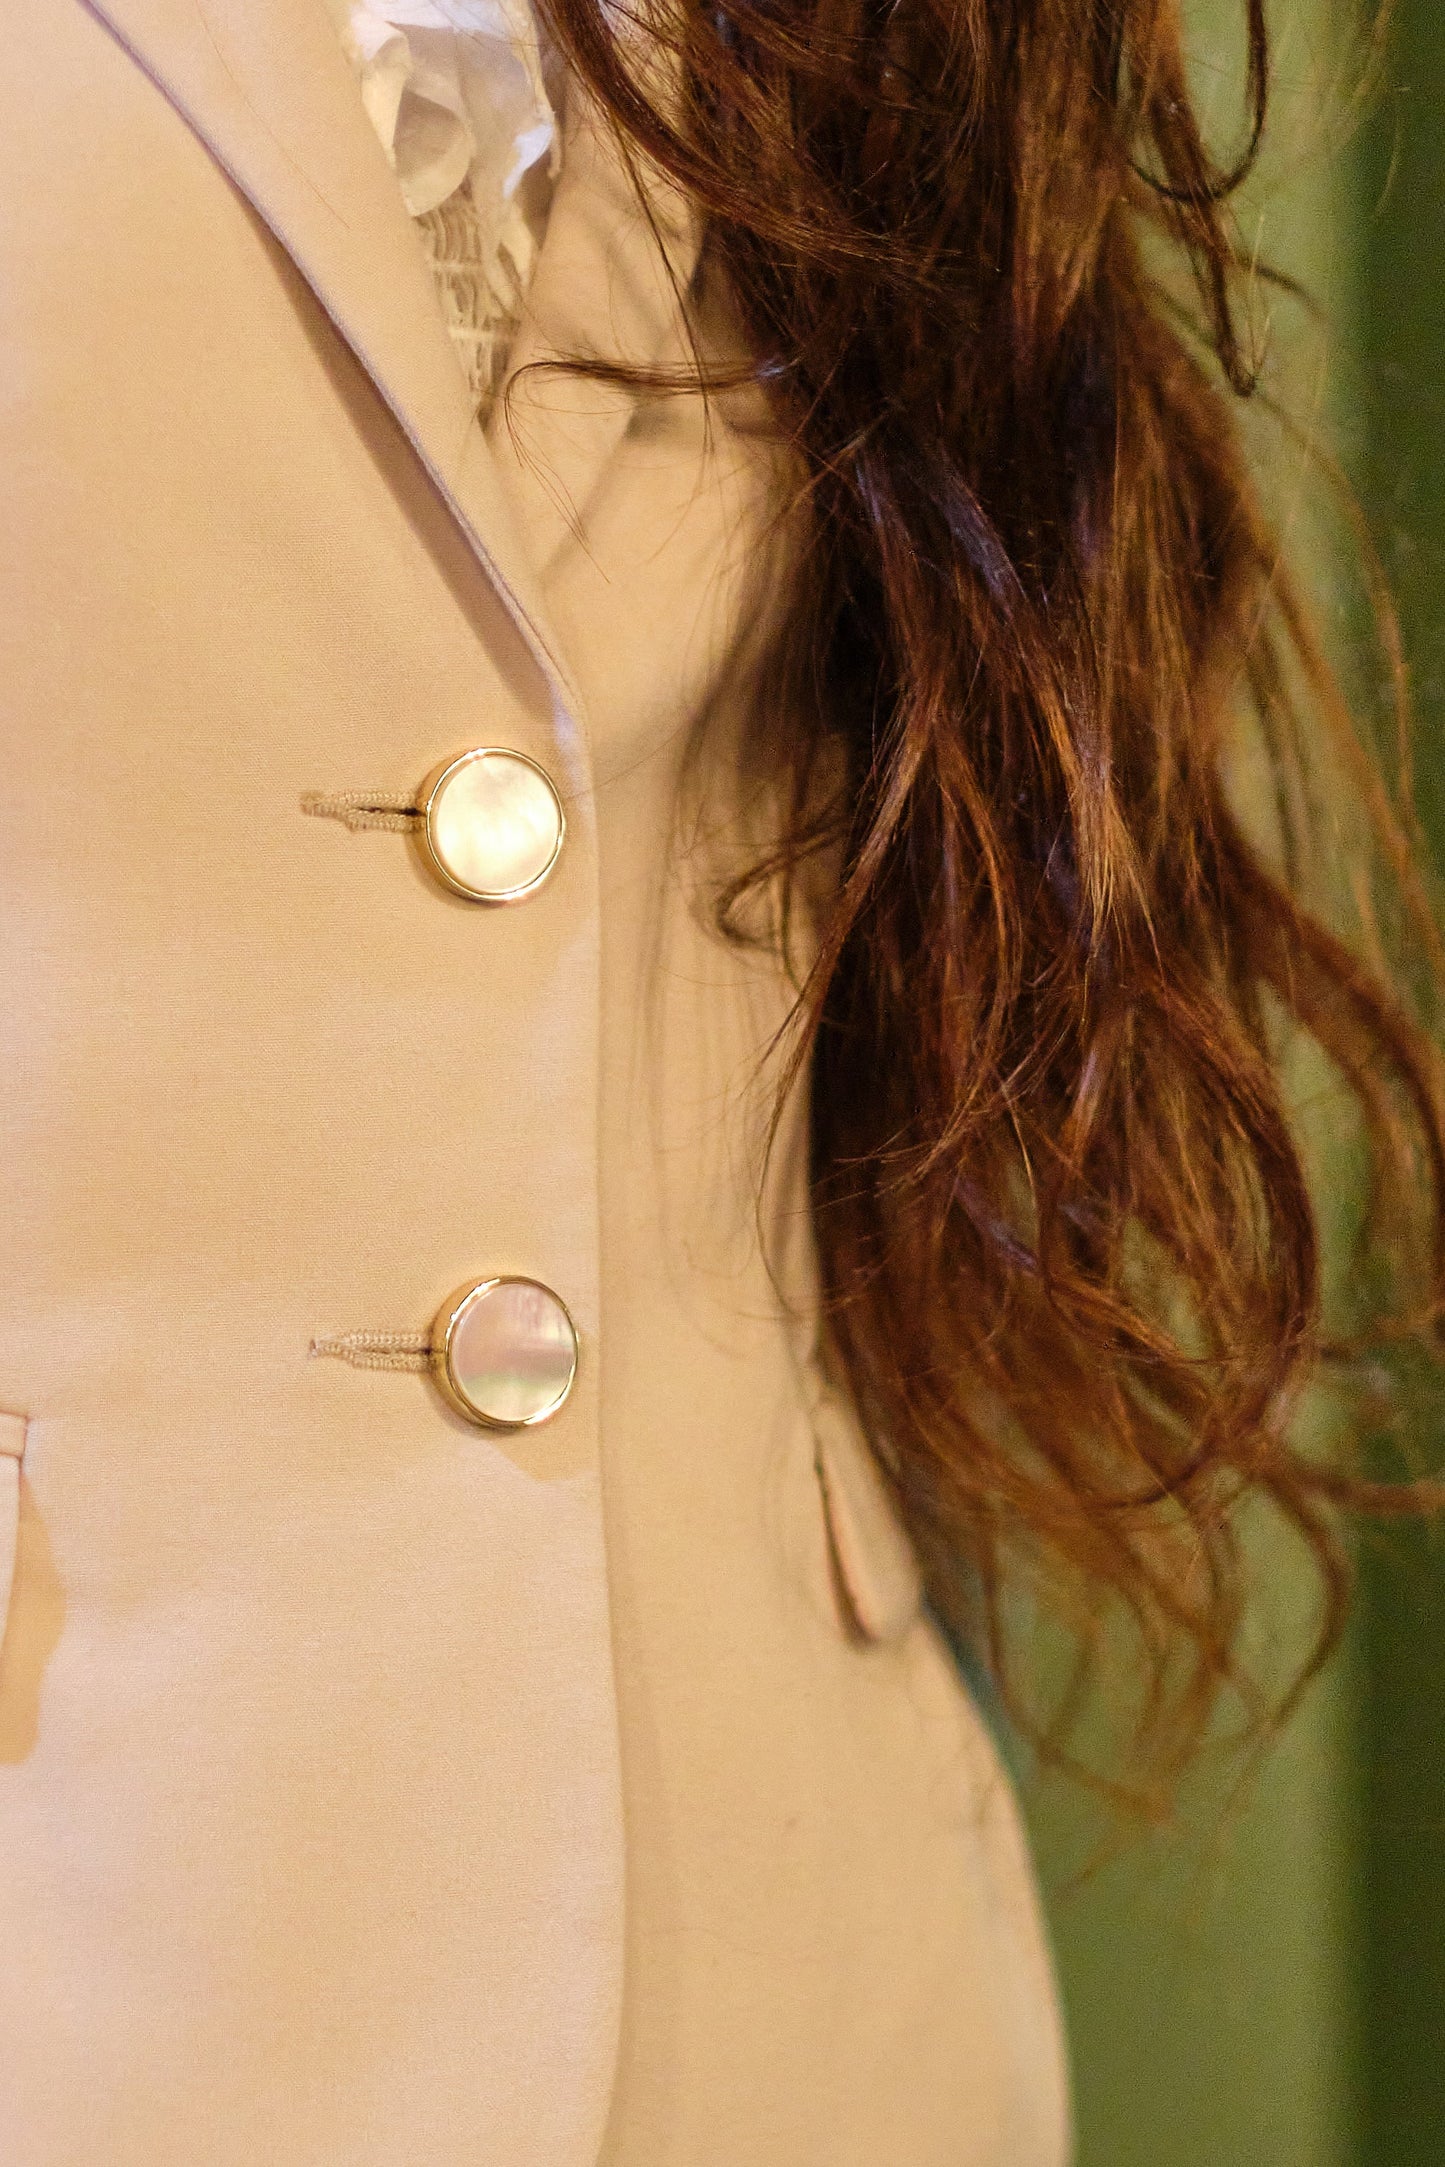 21mm button in shiny gold metal and white mother-of-pearl